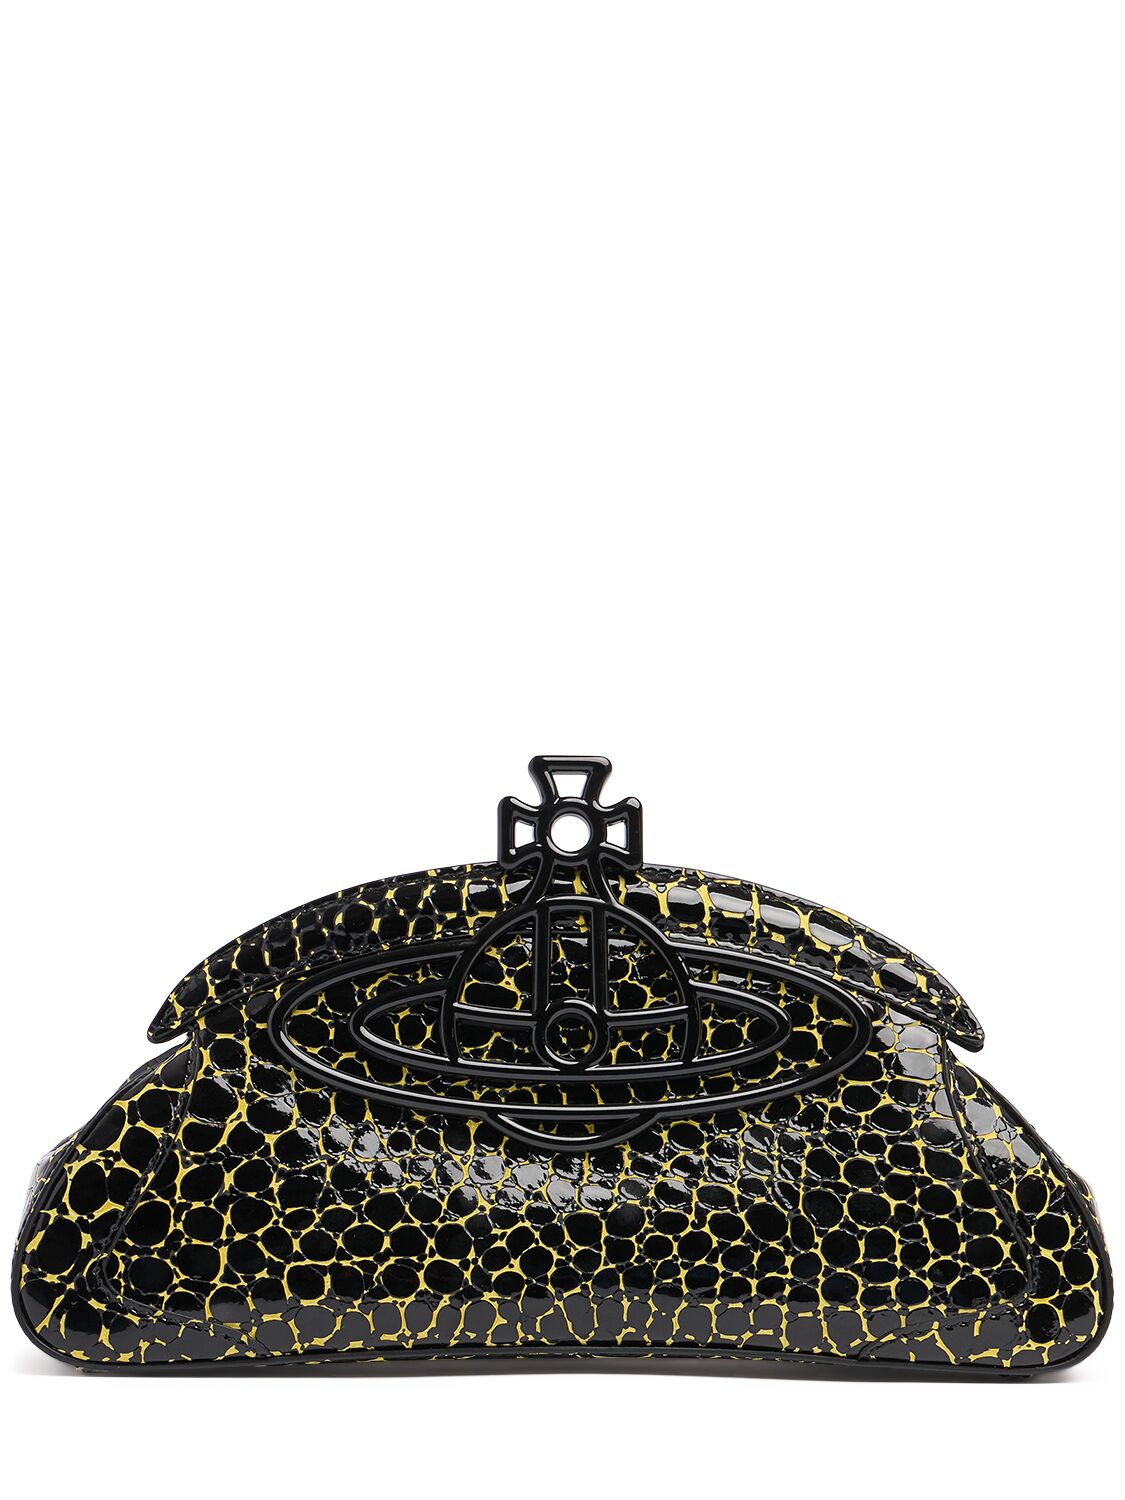 Vivienne Westwood Amber Printed Patent Leather Clutch In Black,yellow